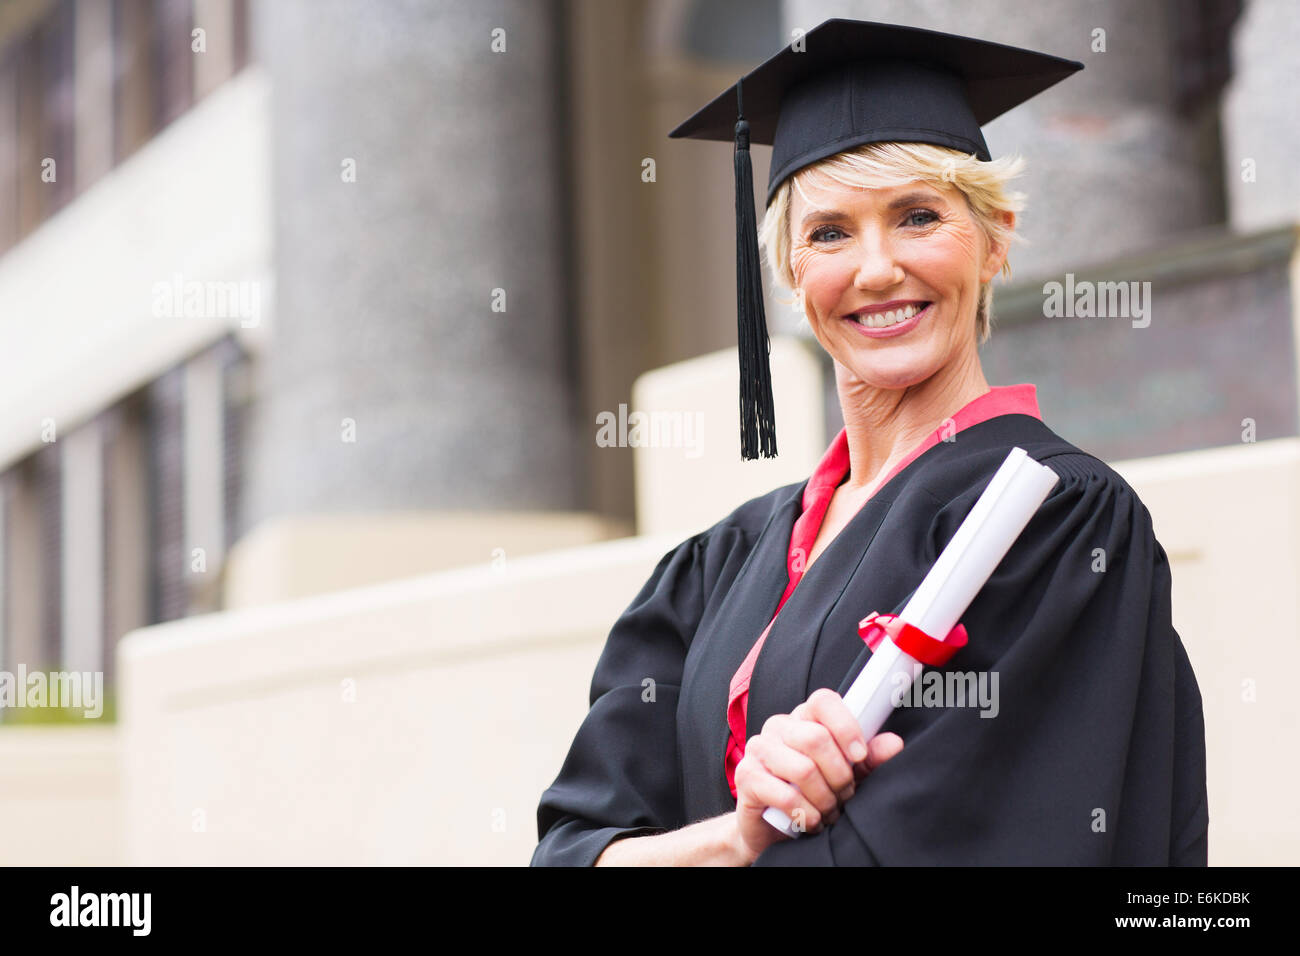 happy middle aged woman with graduation cap and gown holding diploma Stock Photo